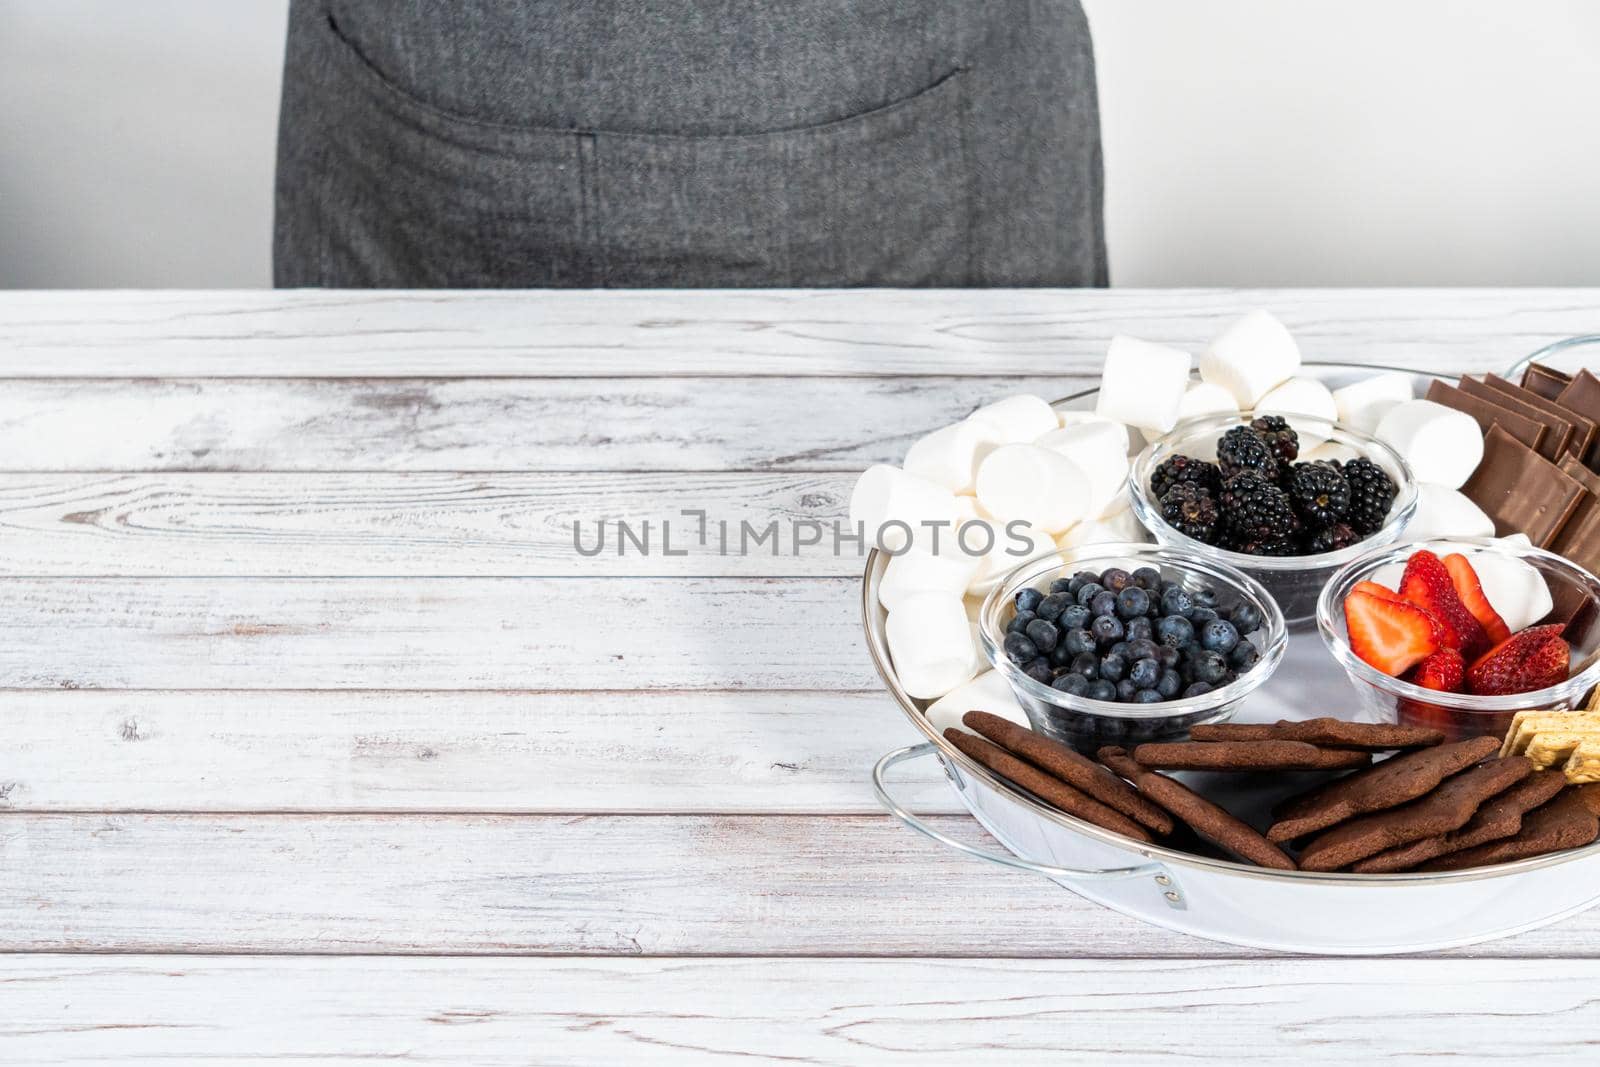 Arranging fruit s'mores charcuterie board on a white tray.